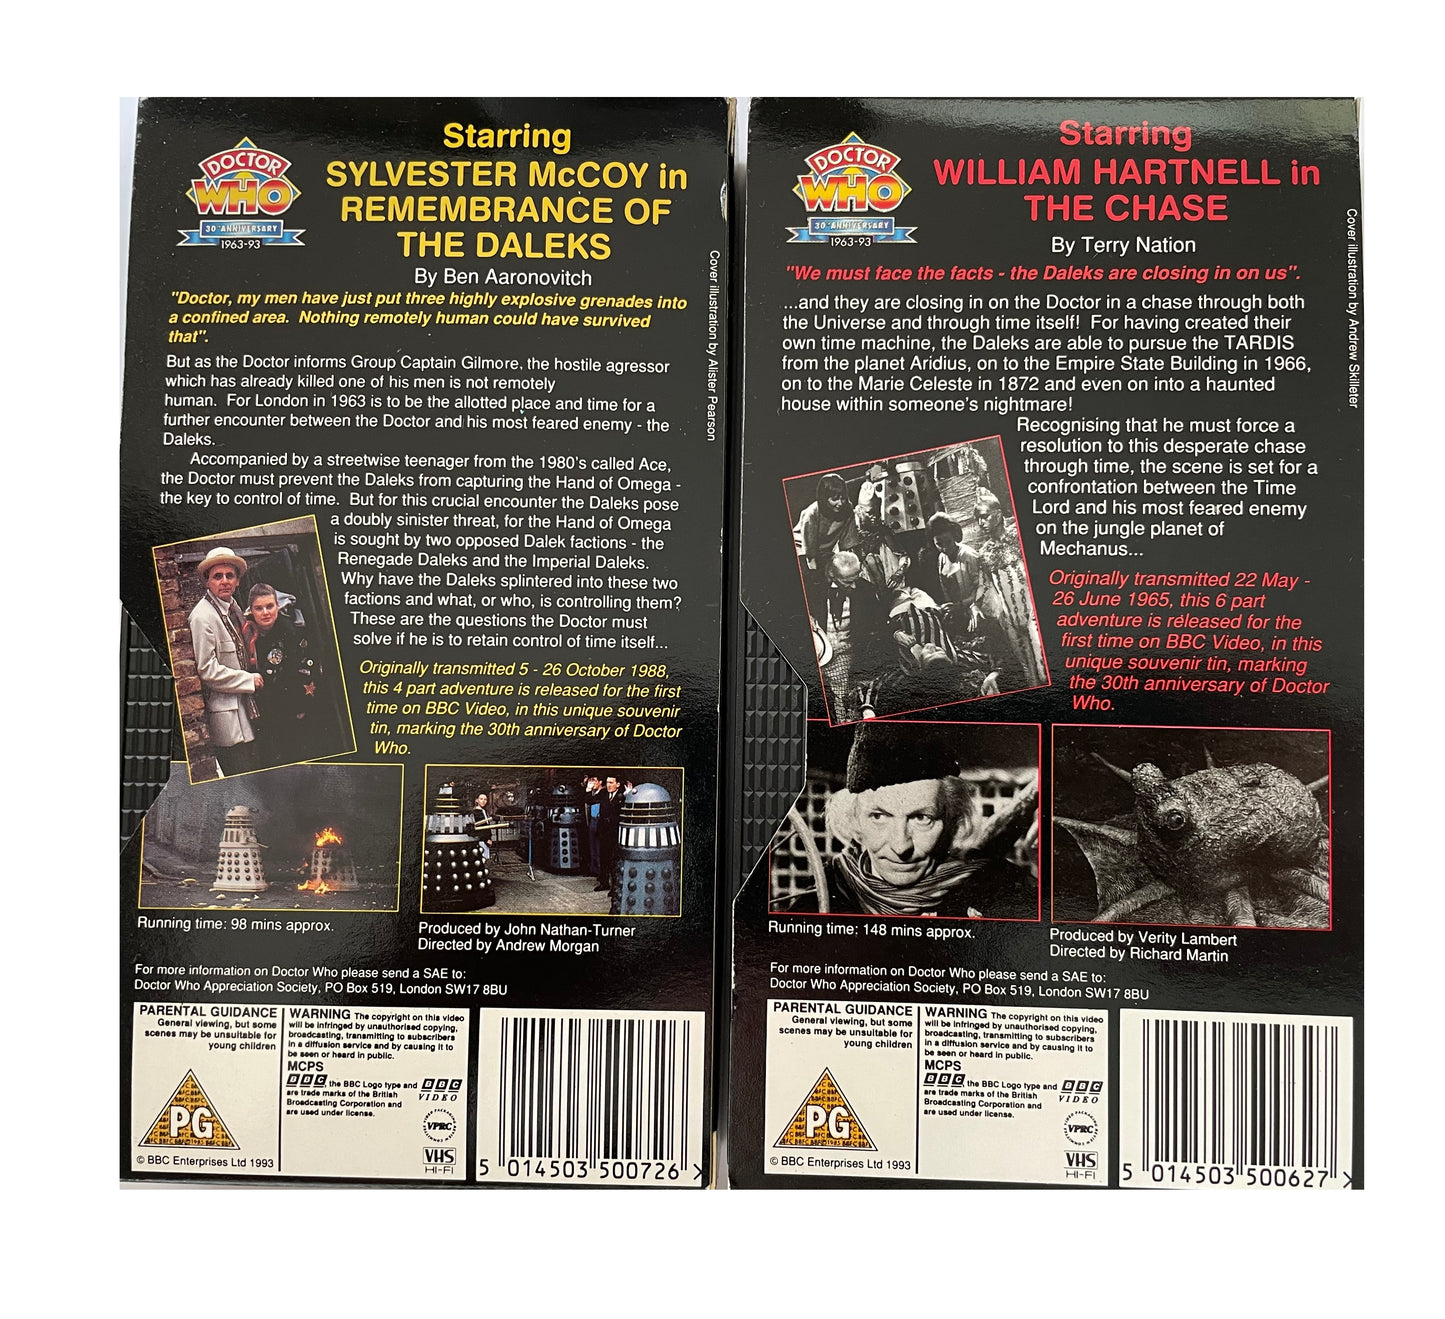 Vintage Dr Doctor Who The Daleks - The Chase & Remembrance Of The Daleks Double VHS Video Cassettes In A Limited Edition Collectable Tin - Shop Stock Room Find.